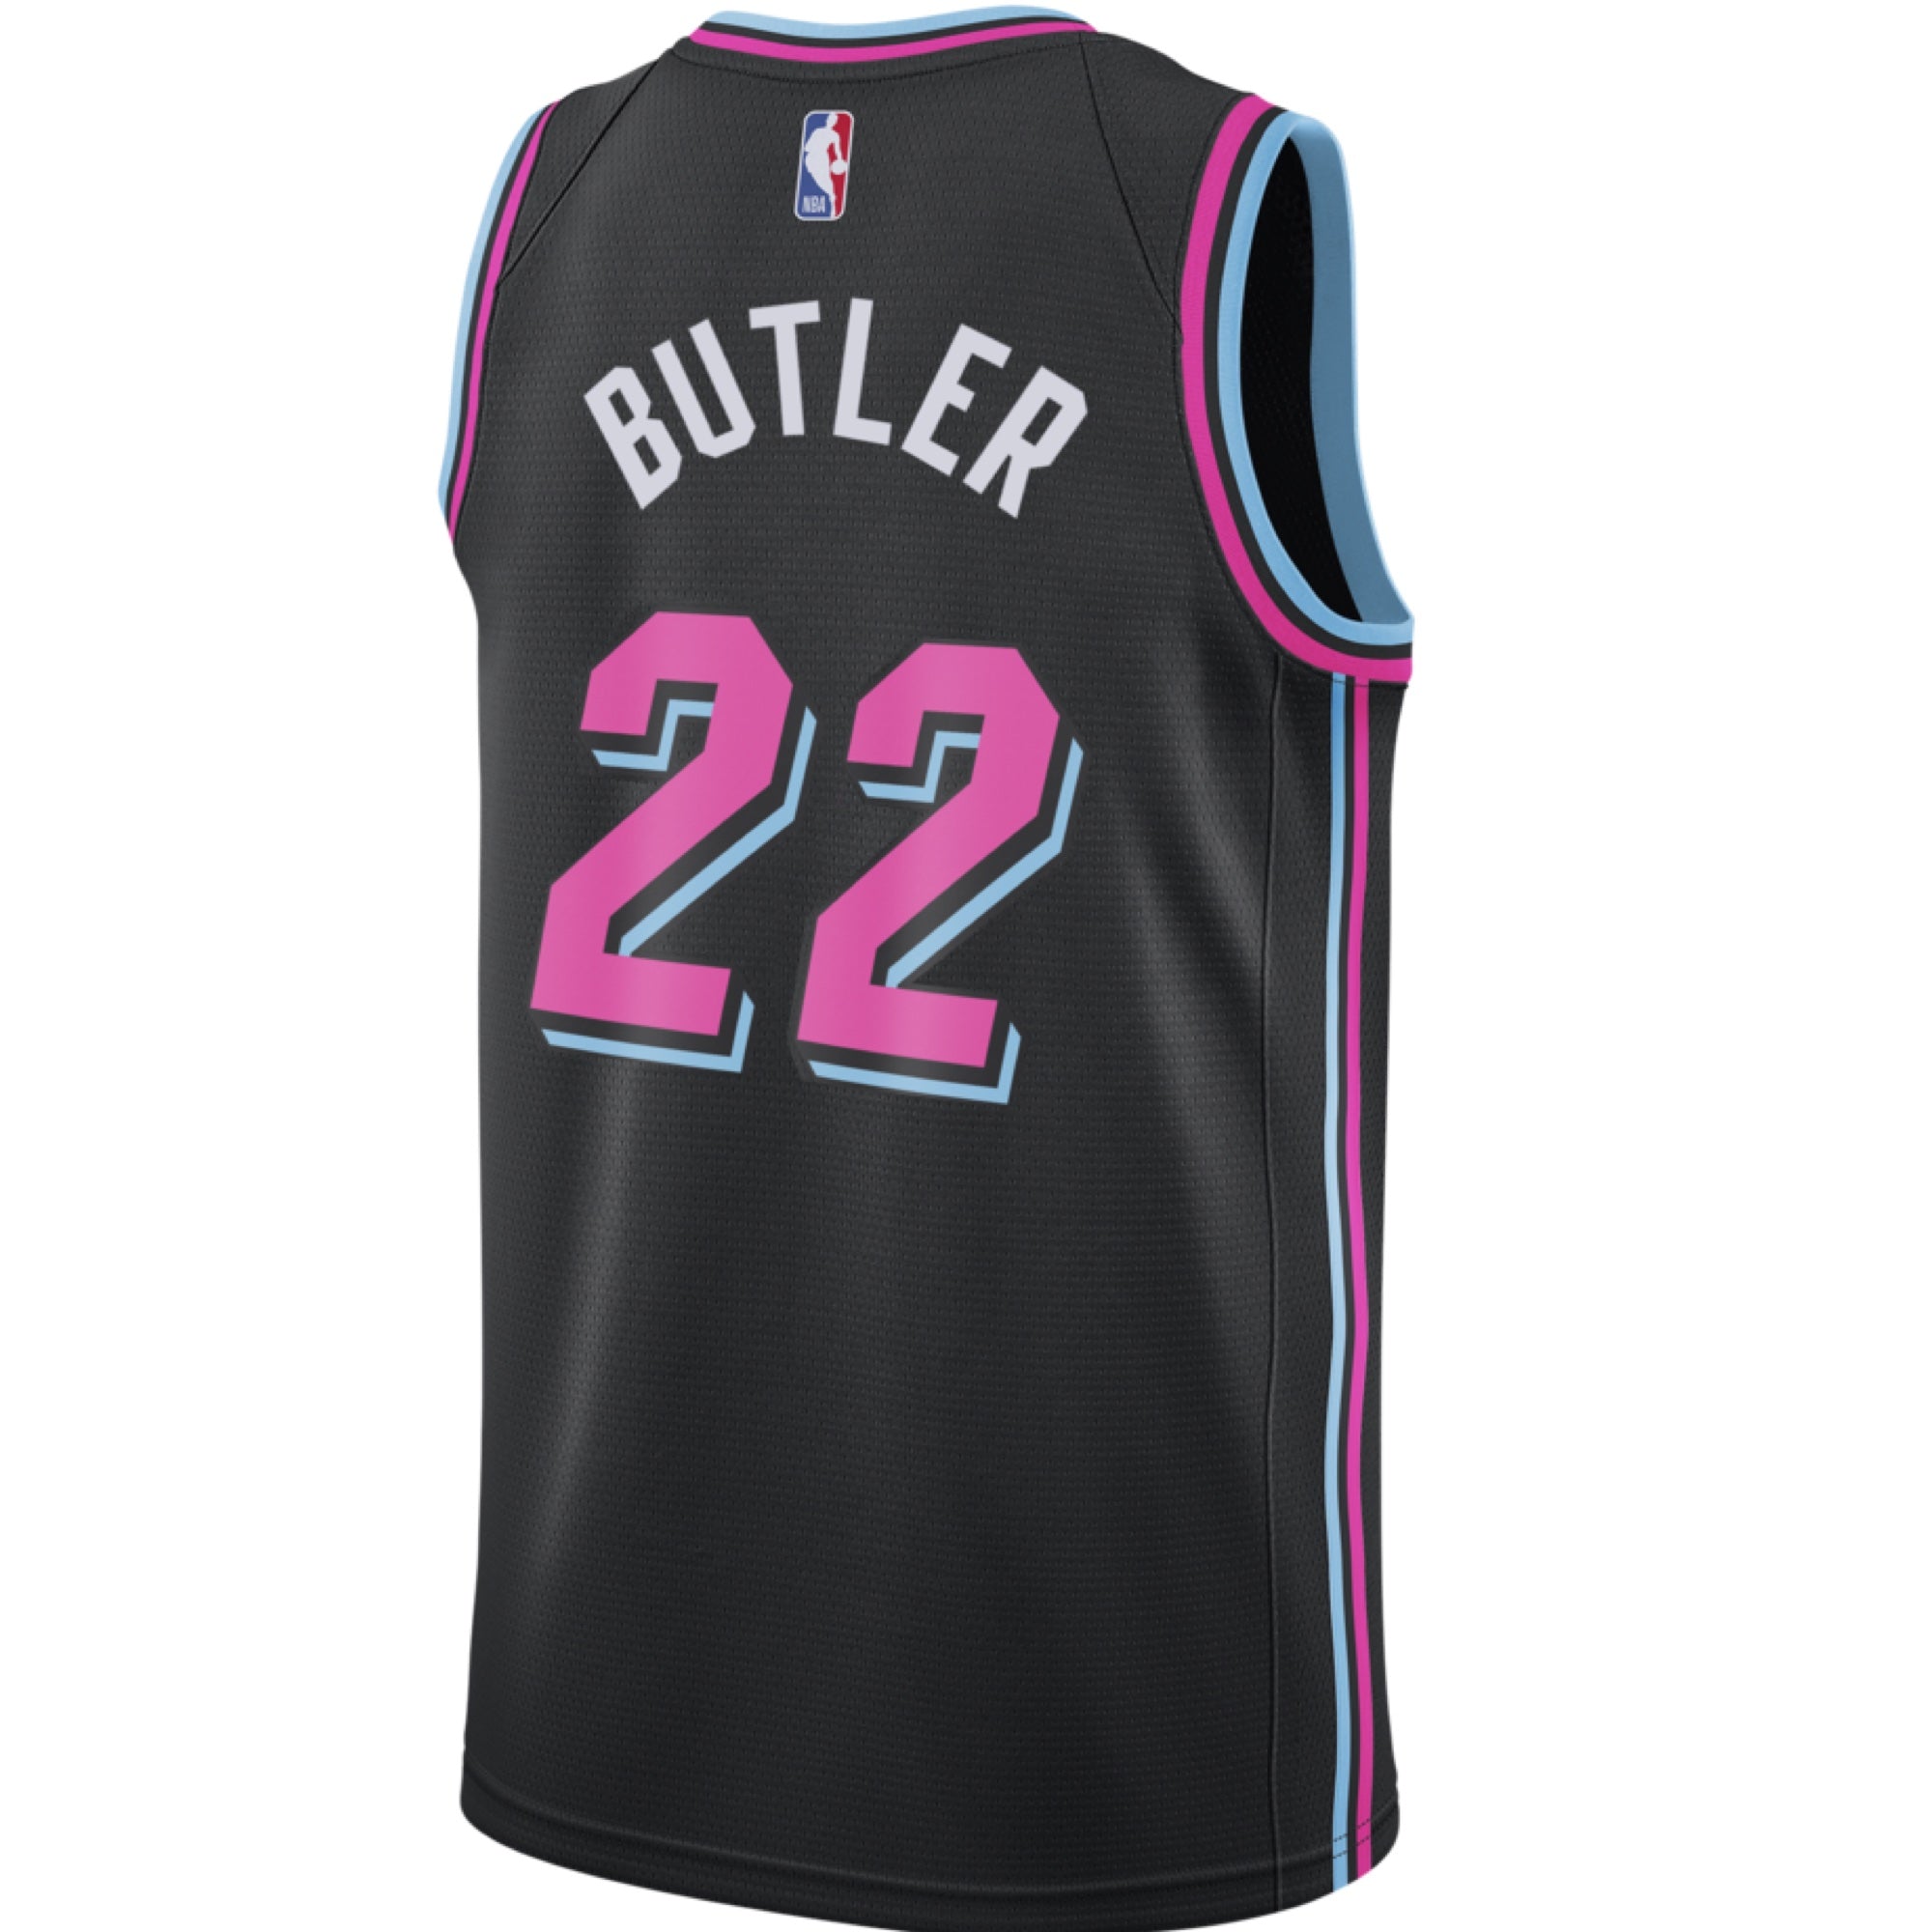 Jimmy Butler Miami Heat Jersey Vice : Famous basketball team and player  jersey on sale